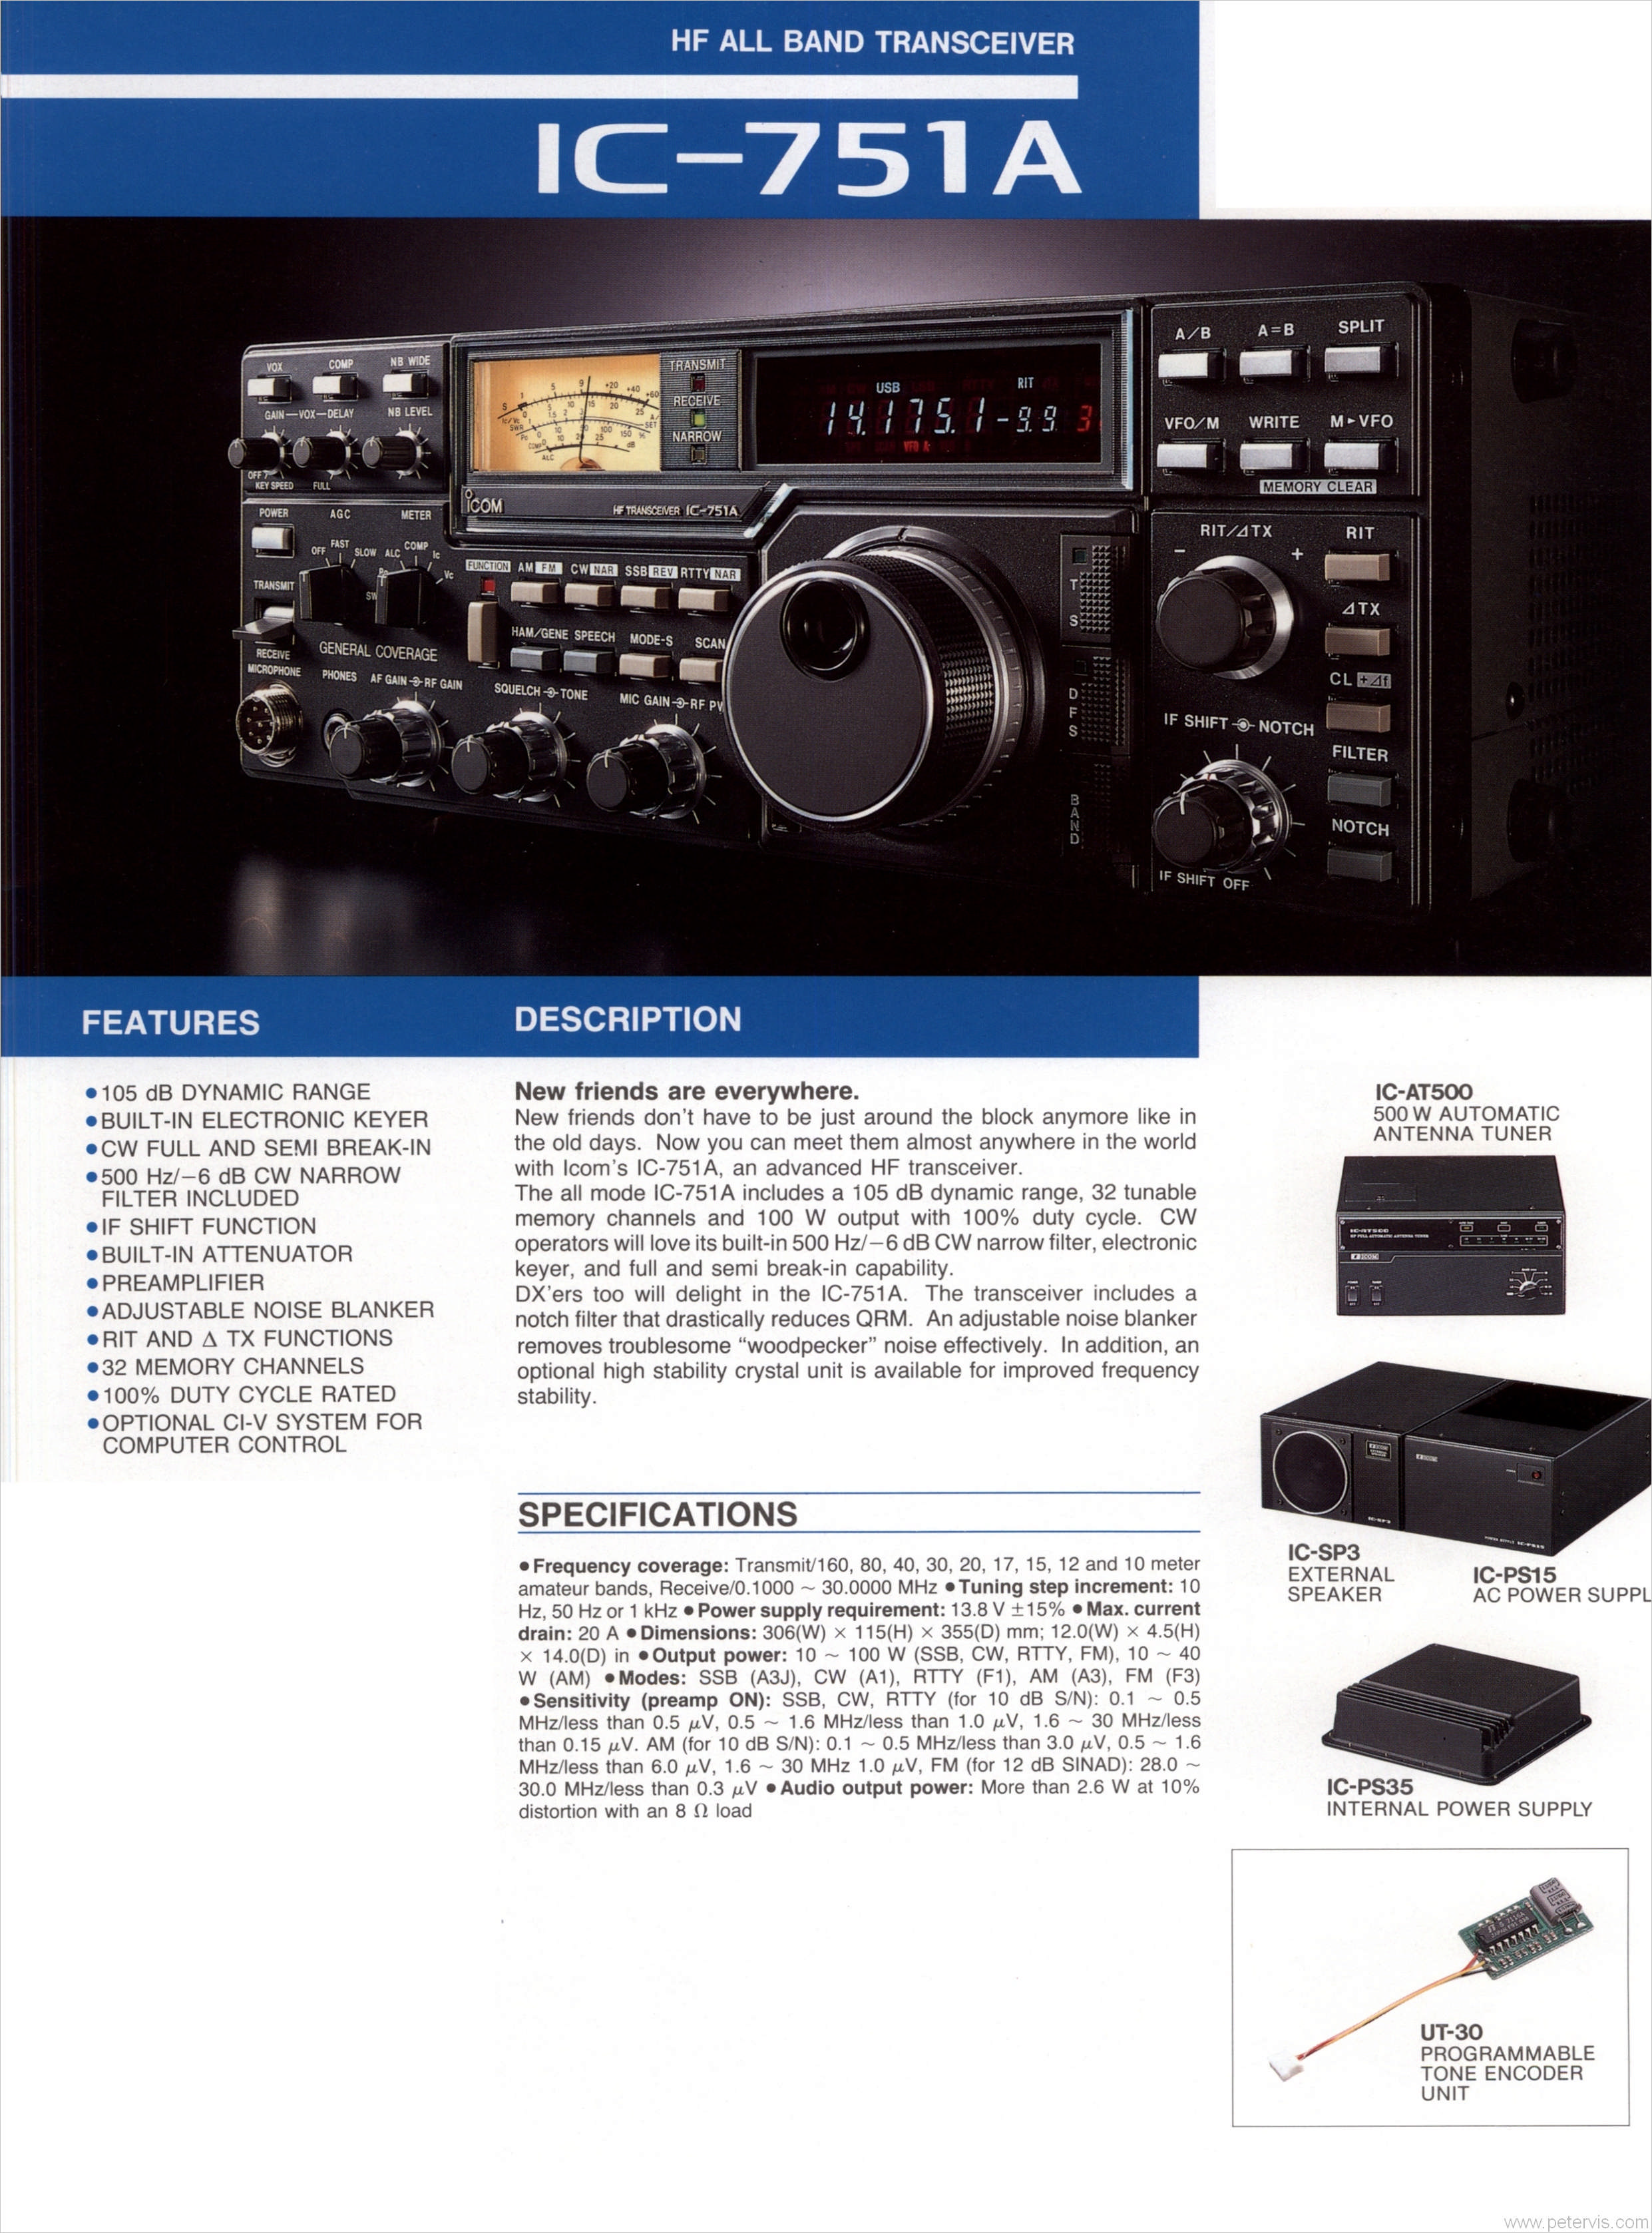 IC-751A SPECIFICATION and FEATURES